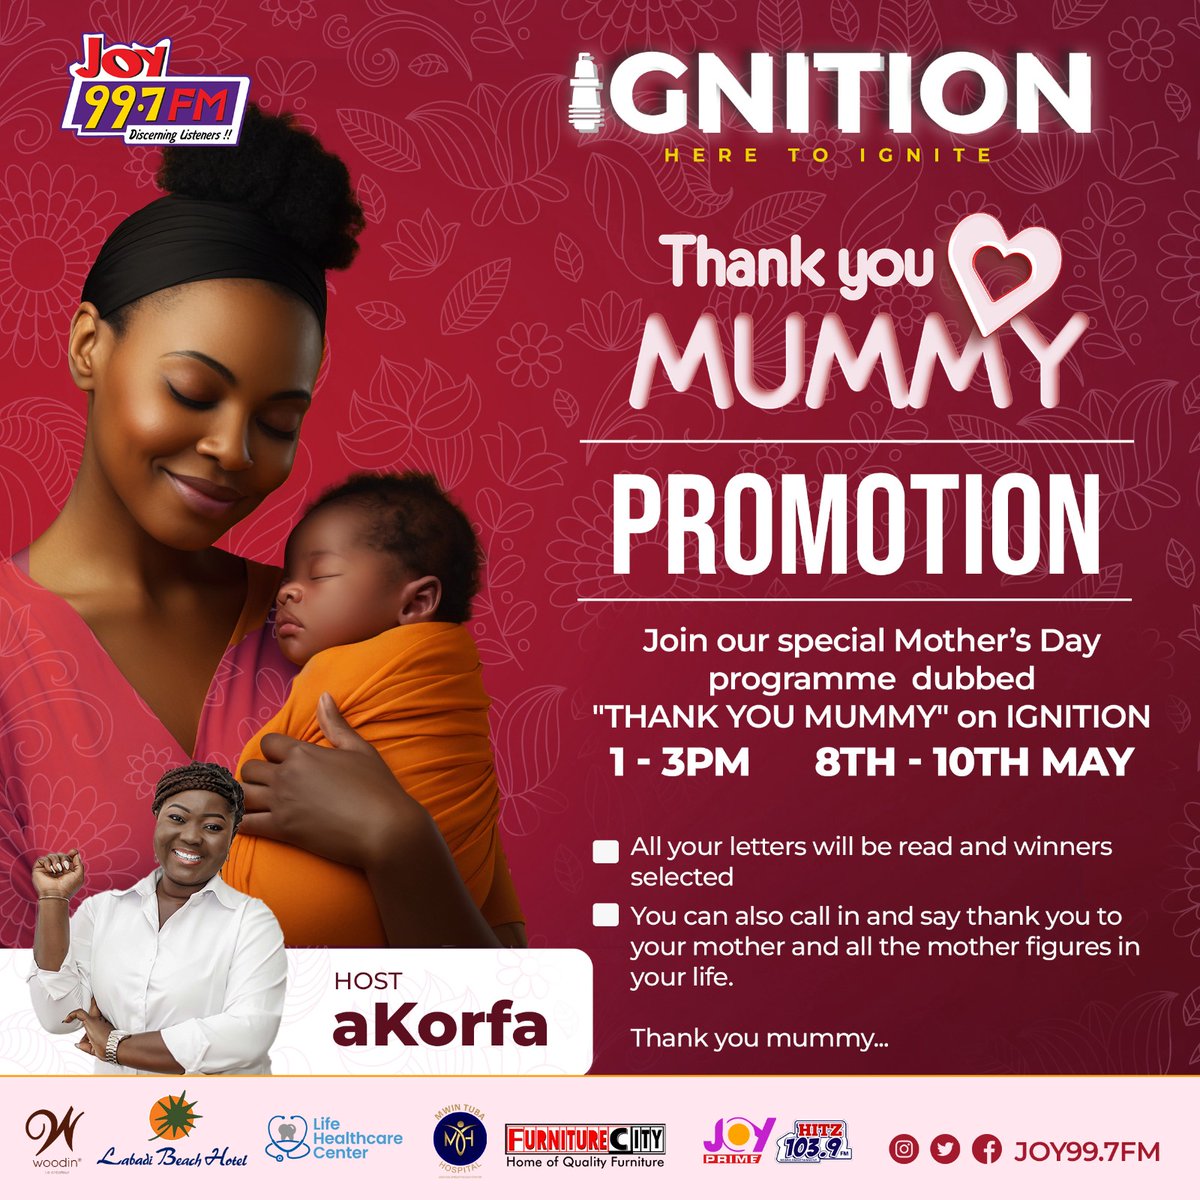 🌸 Join our 'Thank You Mummy' promotion on Ignition with @iamakorfa_! 💌Tune in to hear the touching messages about mothers who went above and beyond, and contribute to selecting a winner. #ThankYouMummy #Ignition